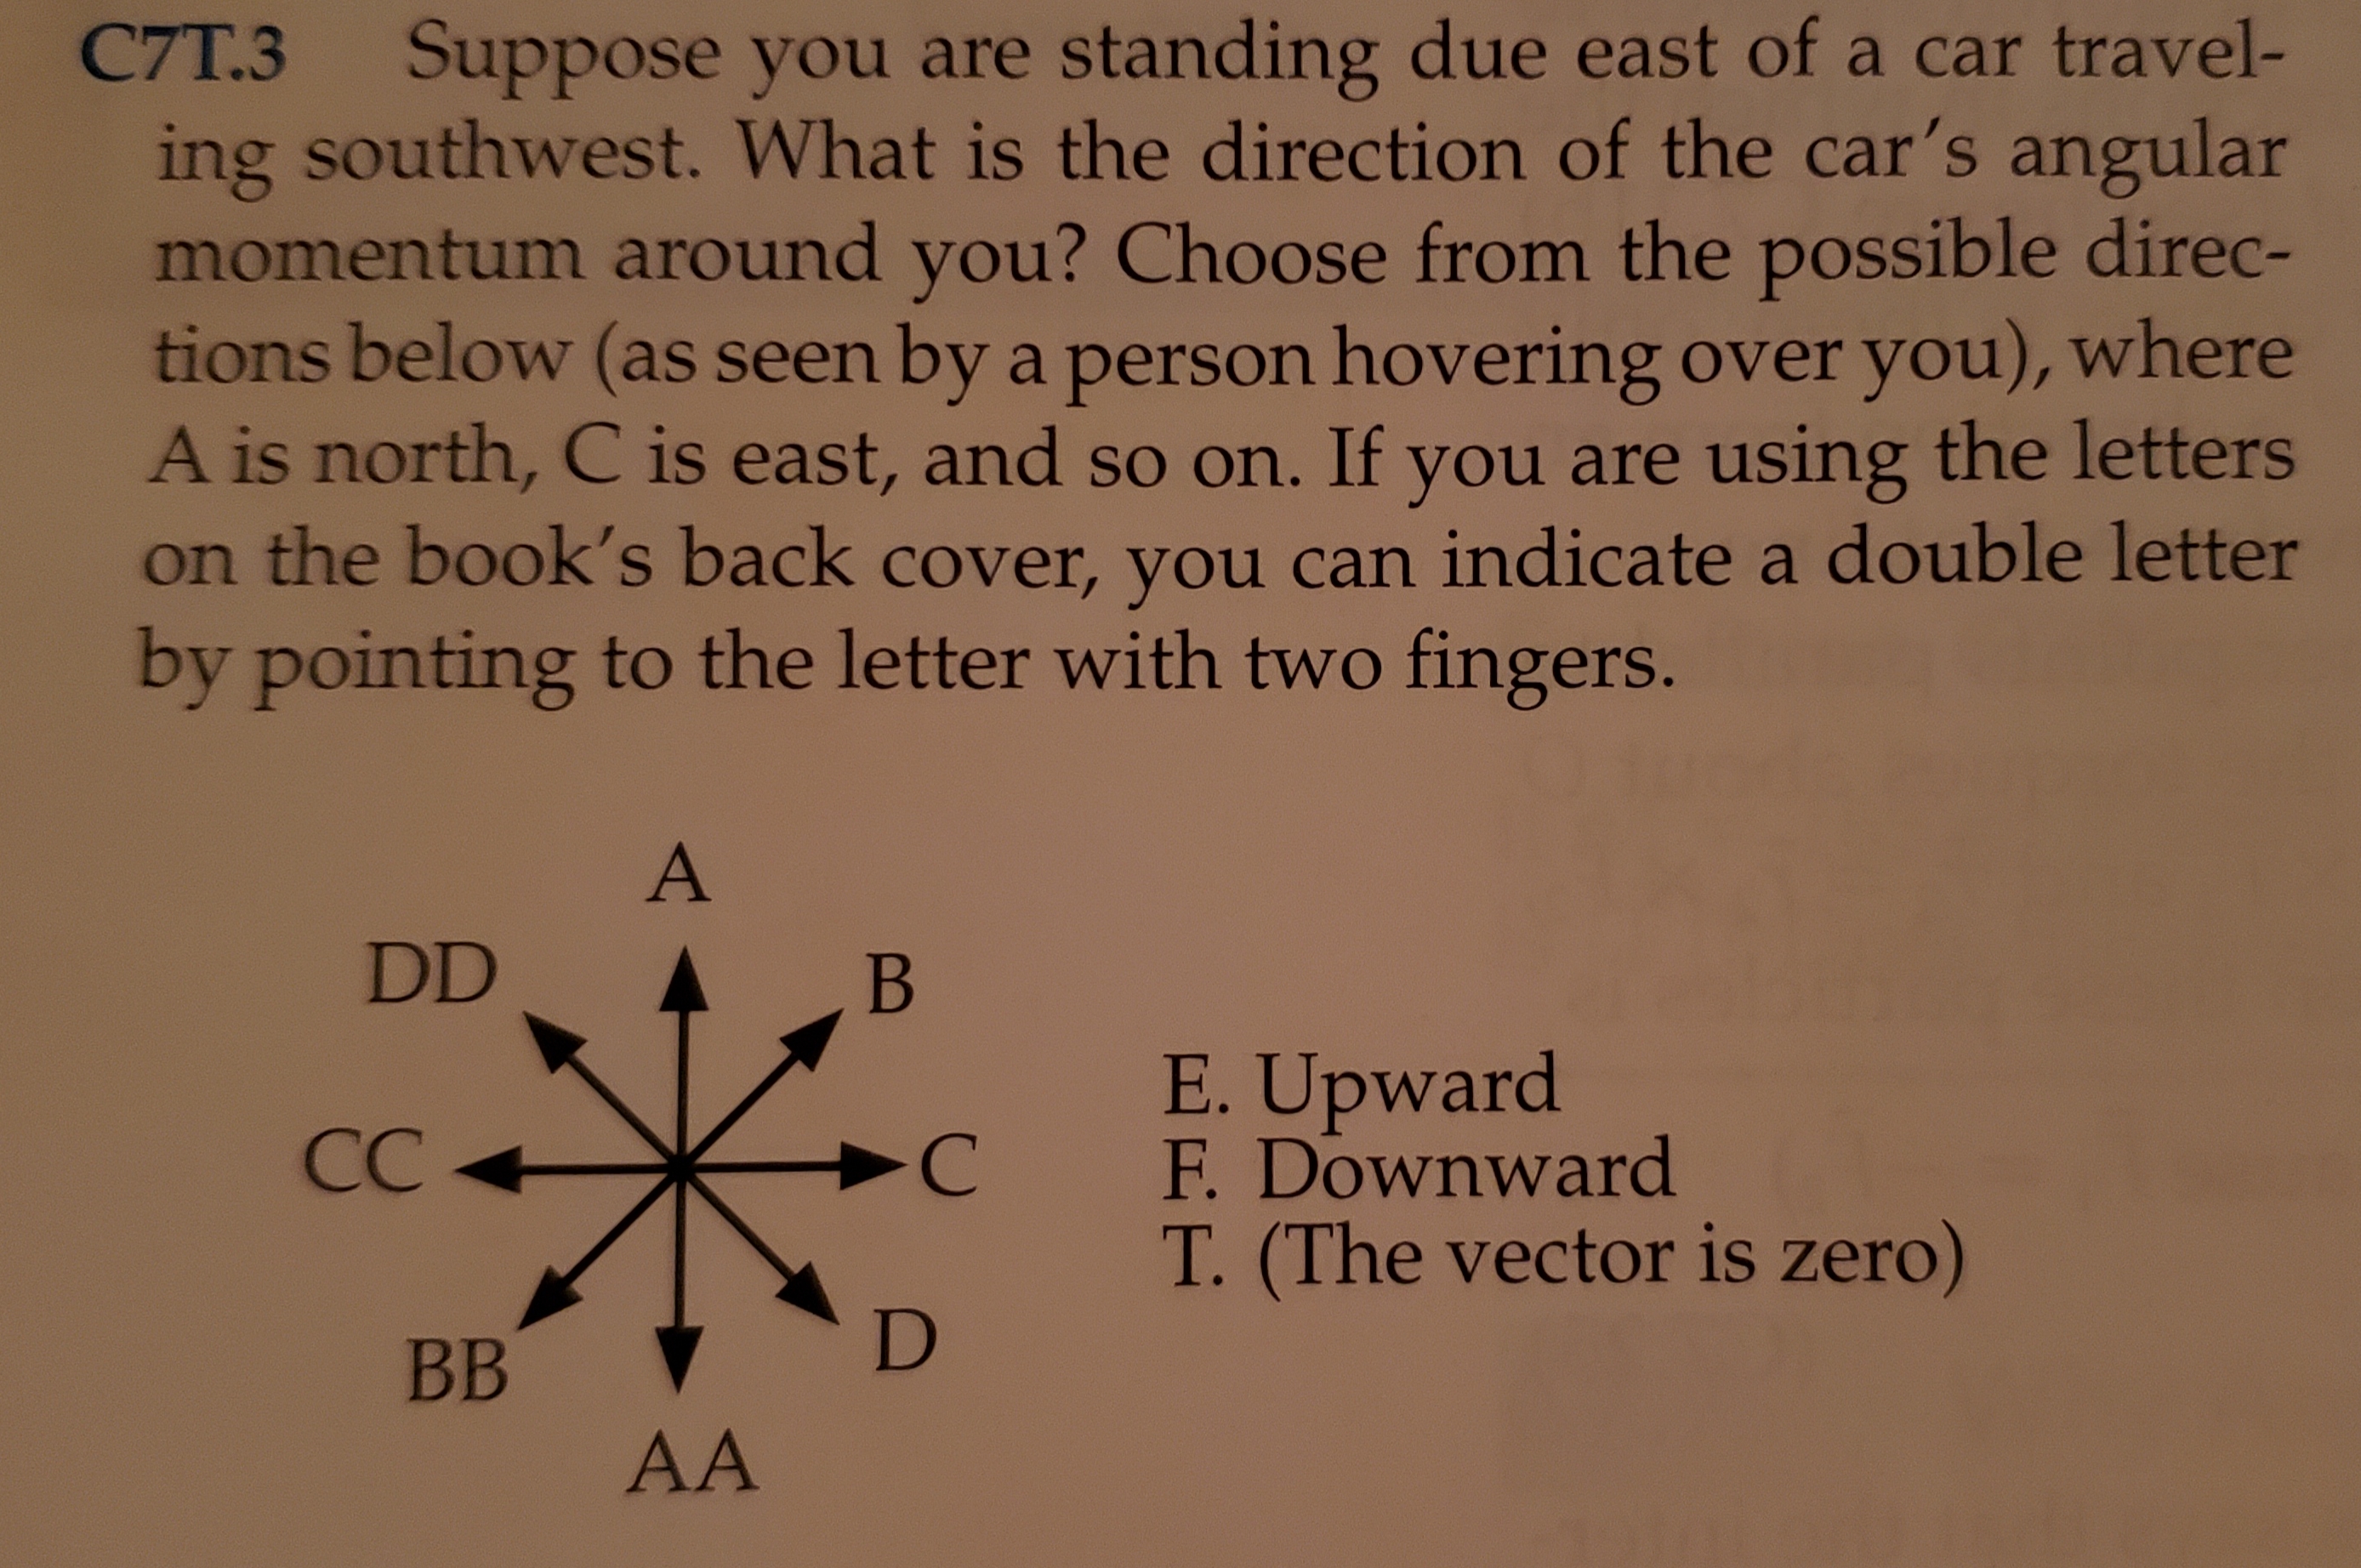 C7T.3
Suppose you are standing due east of a car travel-
ing southwest. What is the direction of the car's angular
momentum around you? Choose from the possible direc-
tions below (as seen by a person hovering over you), where
A is north, C is east, and so on. If you are using the letters
on the book's back cover, you can indicate a double letter
by pointing to the letter with two fingers.
A
DD
В
E.Upward
F. Downward
СС
-C
T. (The vector is zero)
D
ВB
AA
